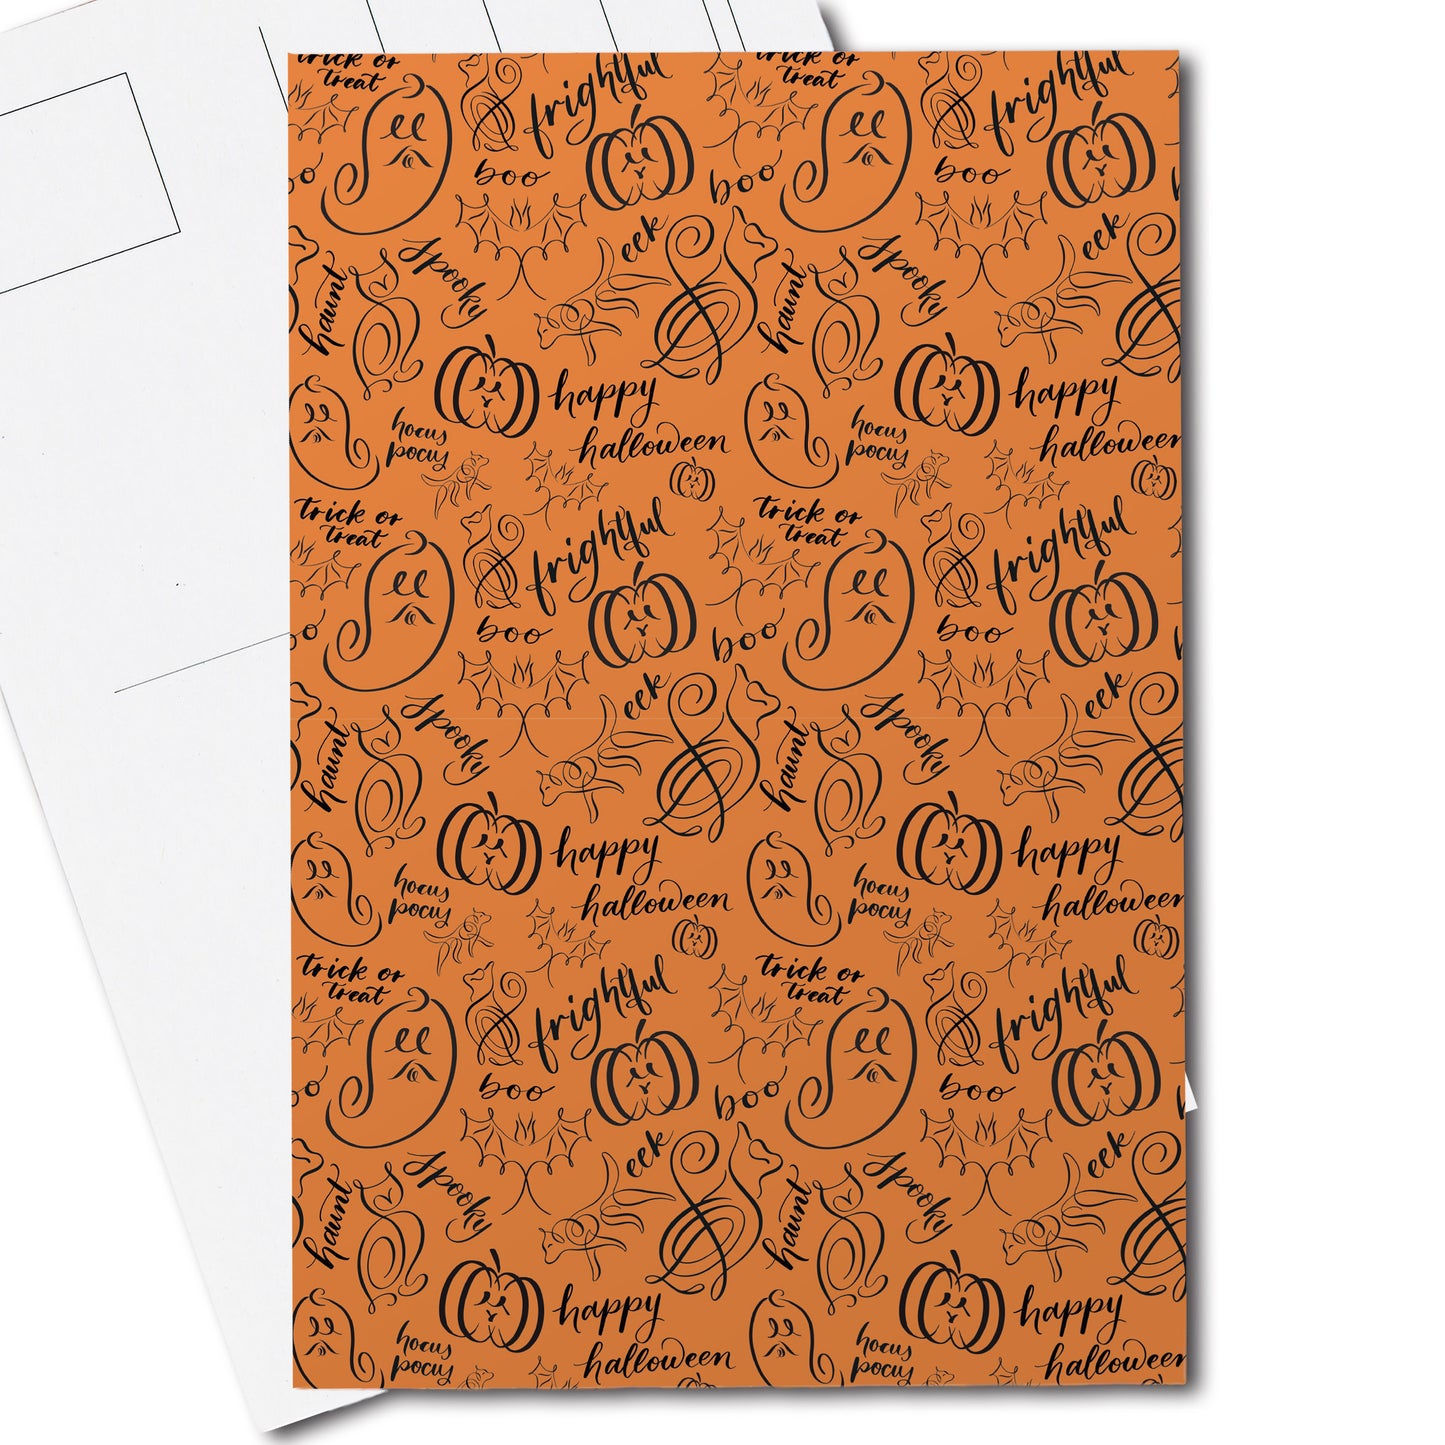 A thumbnail view of the halloween calligraphy postcard: "monster mash (light design)" repeating pattern